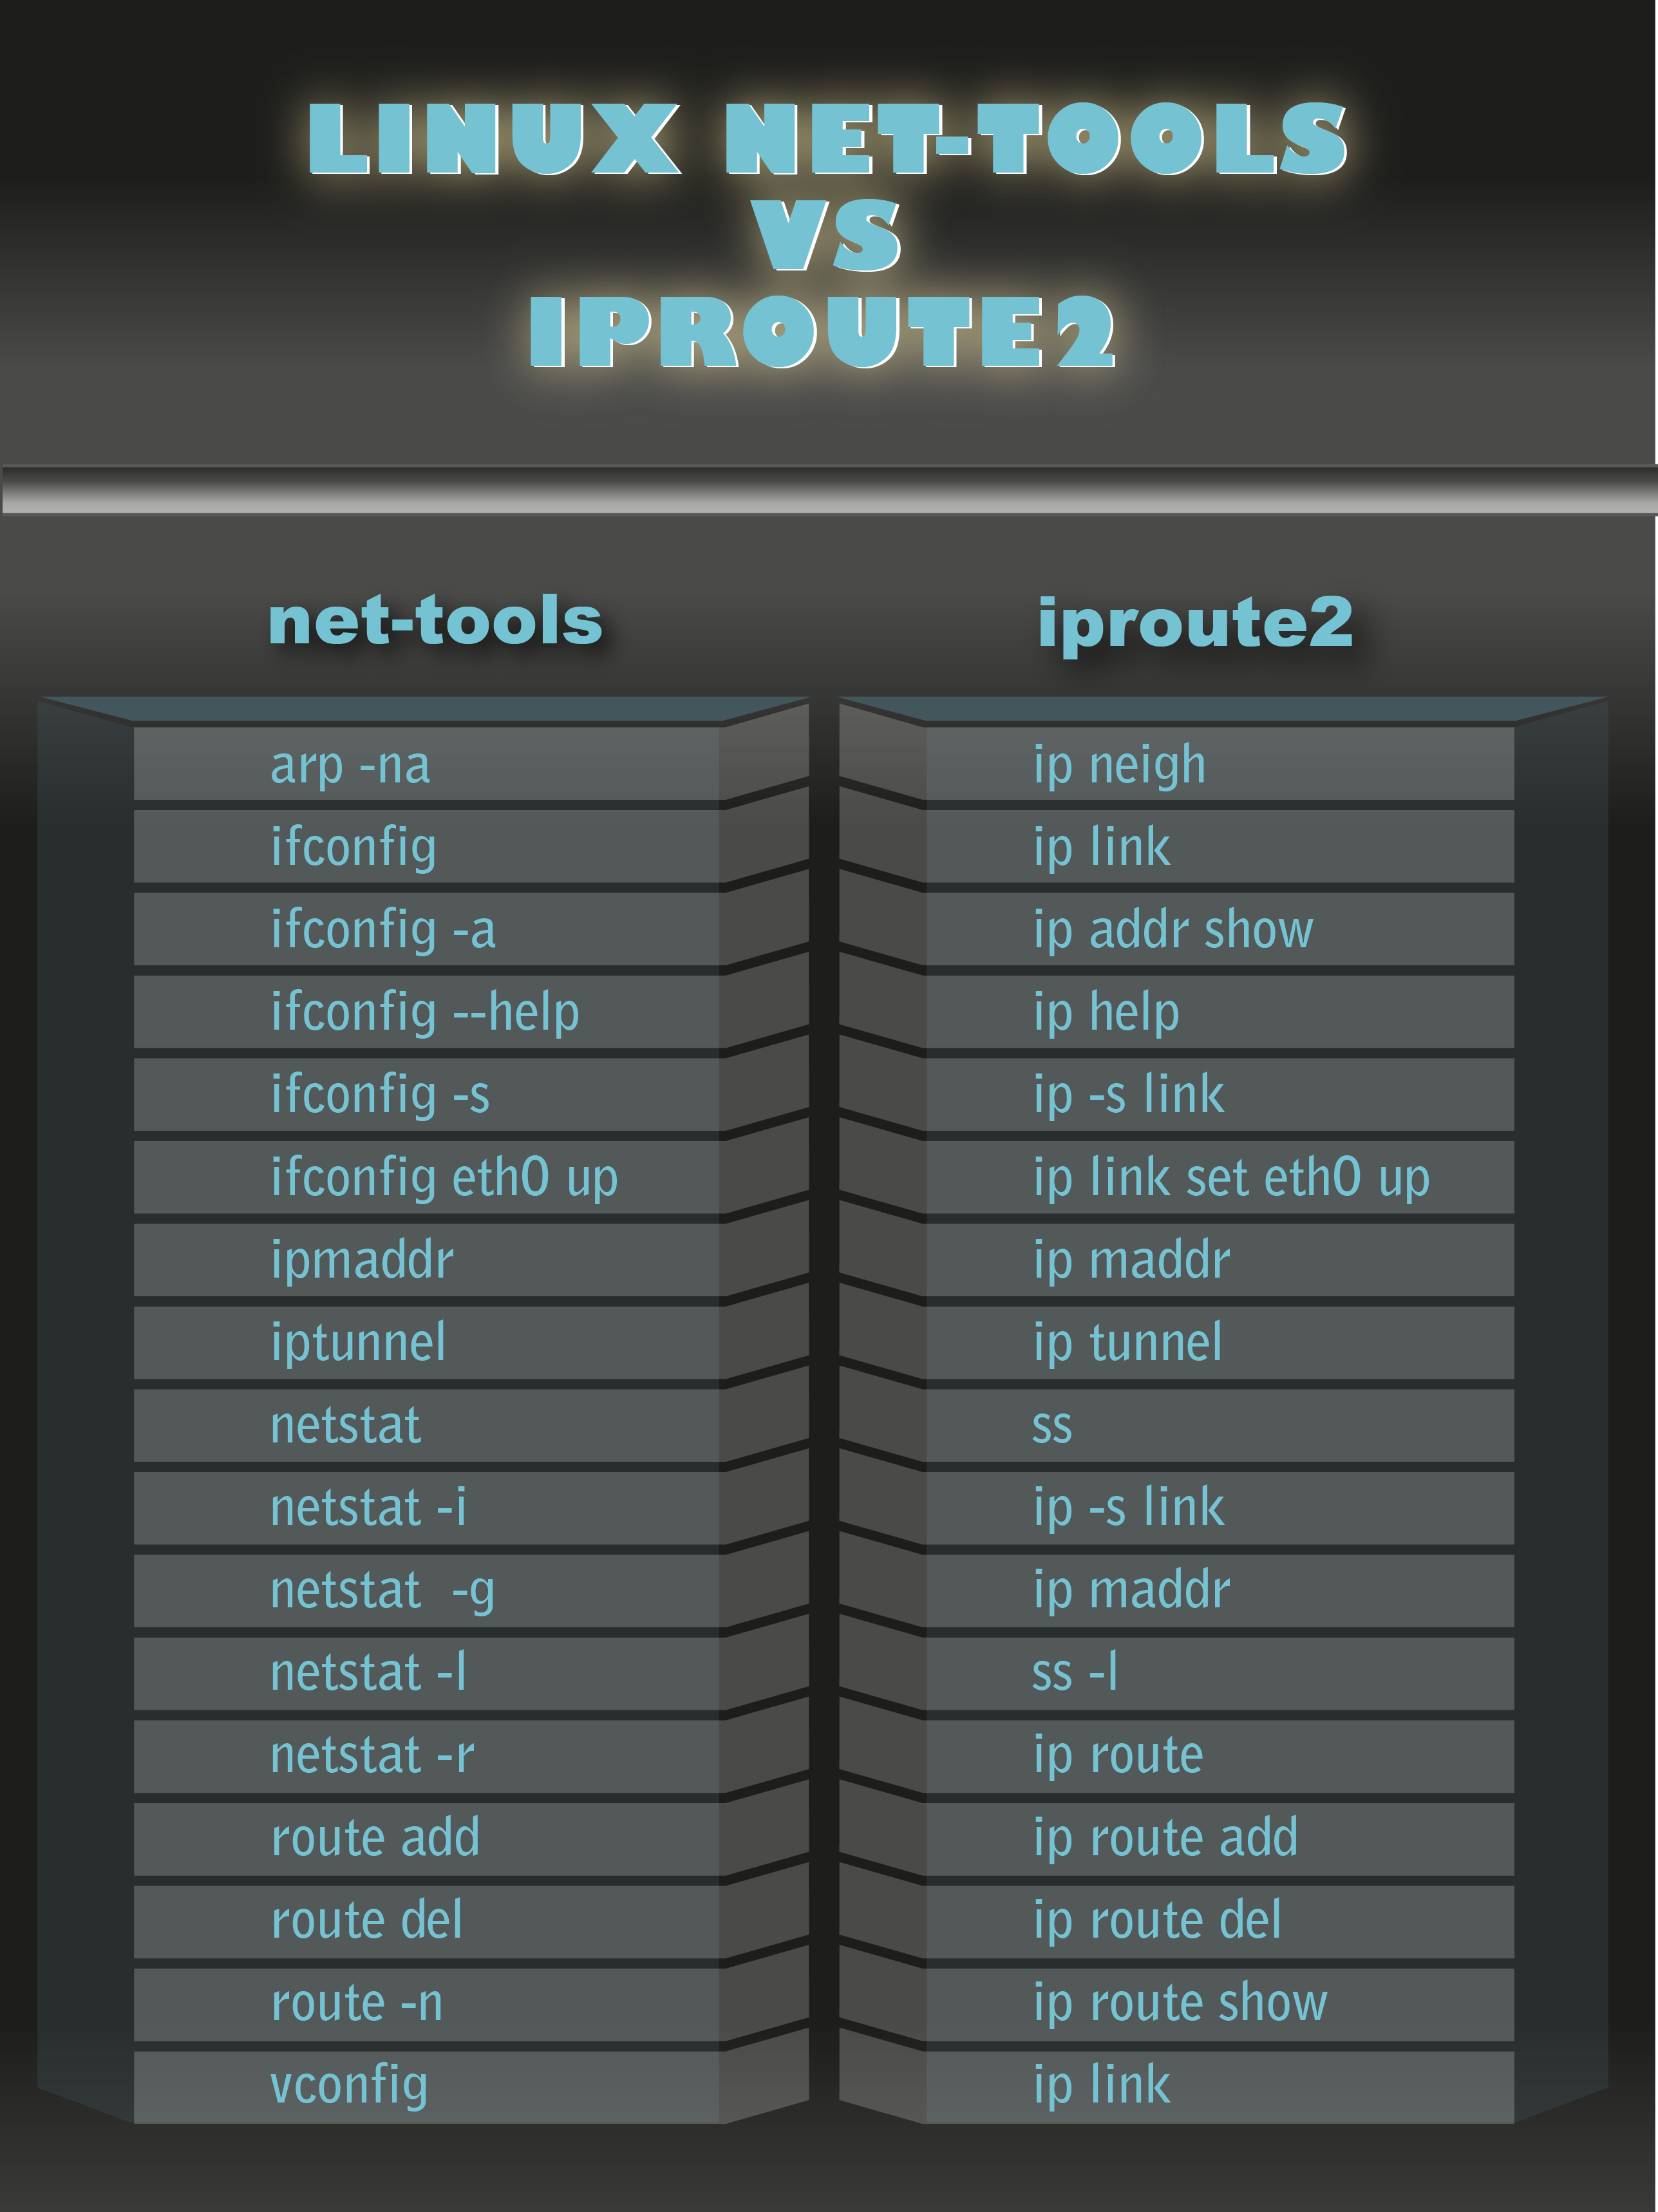 iproute2 vs net-tools